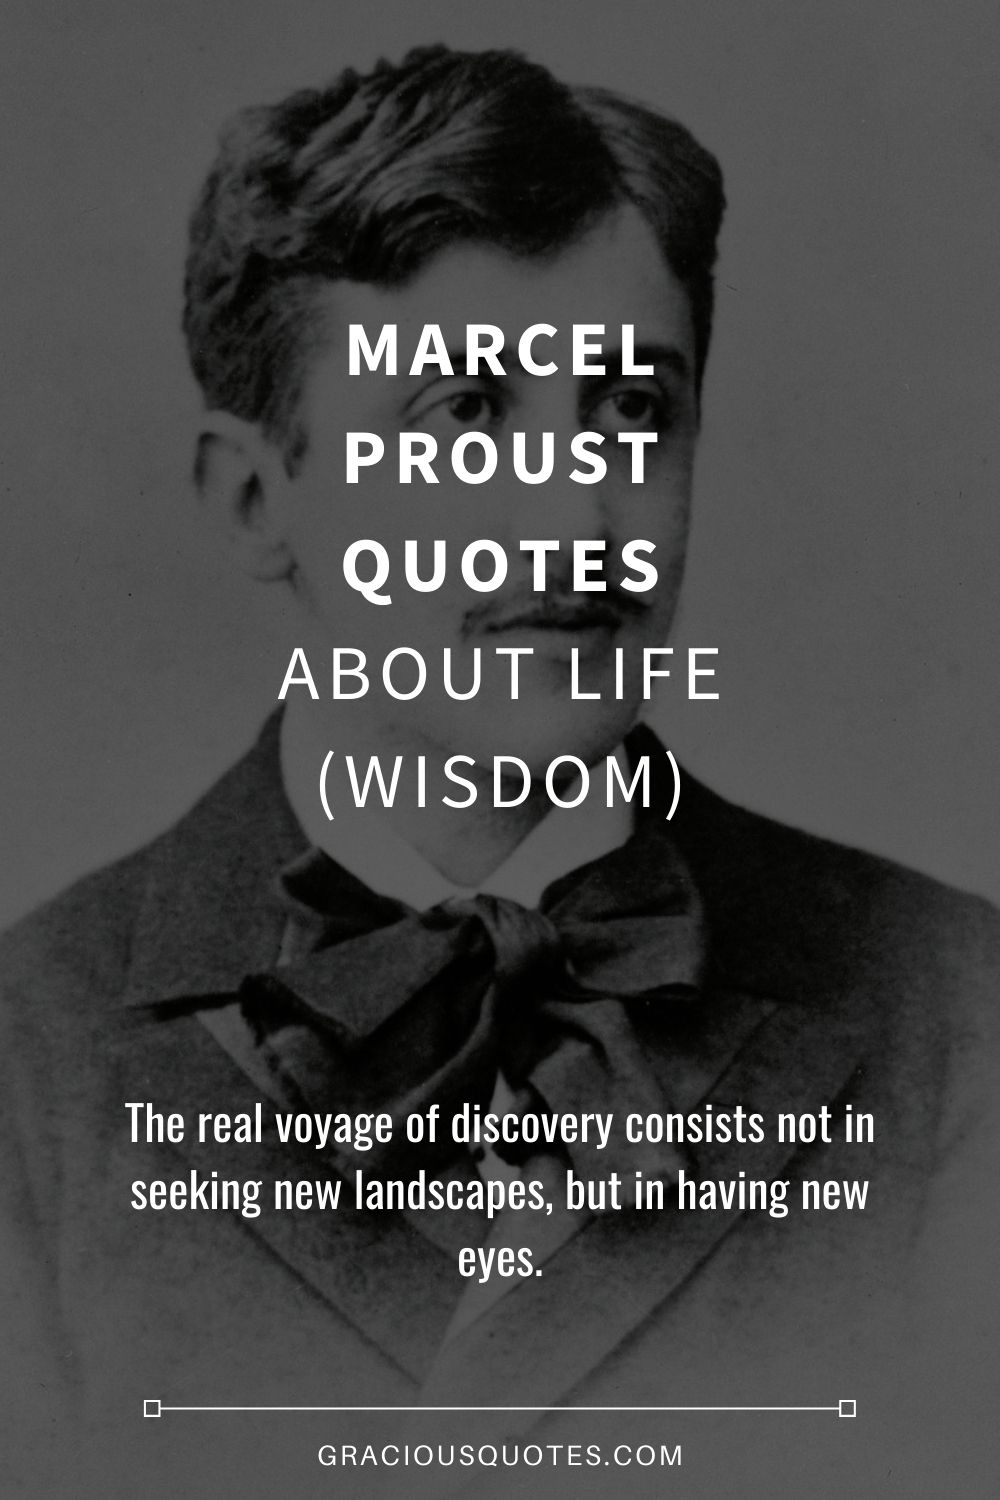 Marcel Proust Quotes About Life (WISDOM) - Gracious Quotes